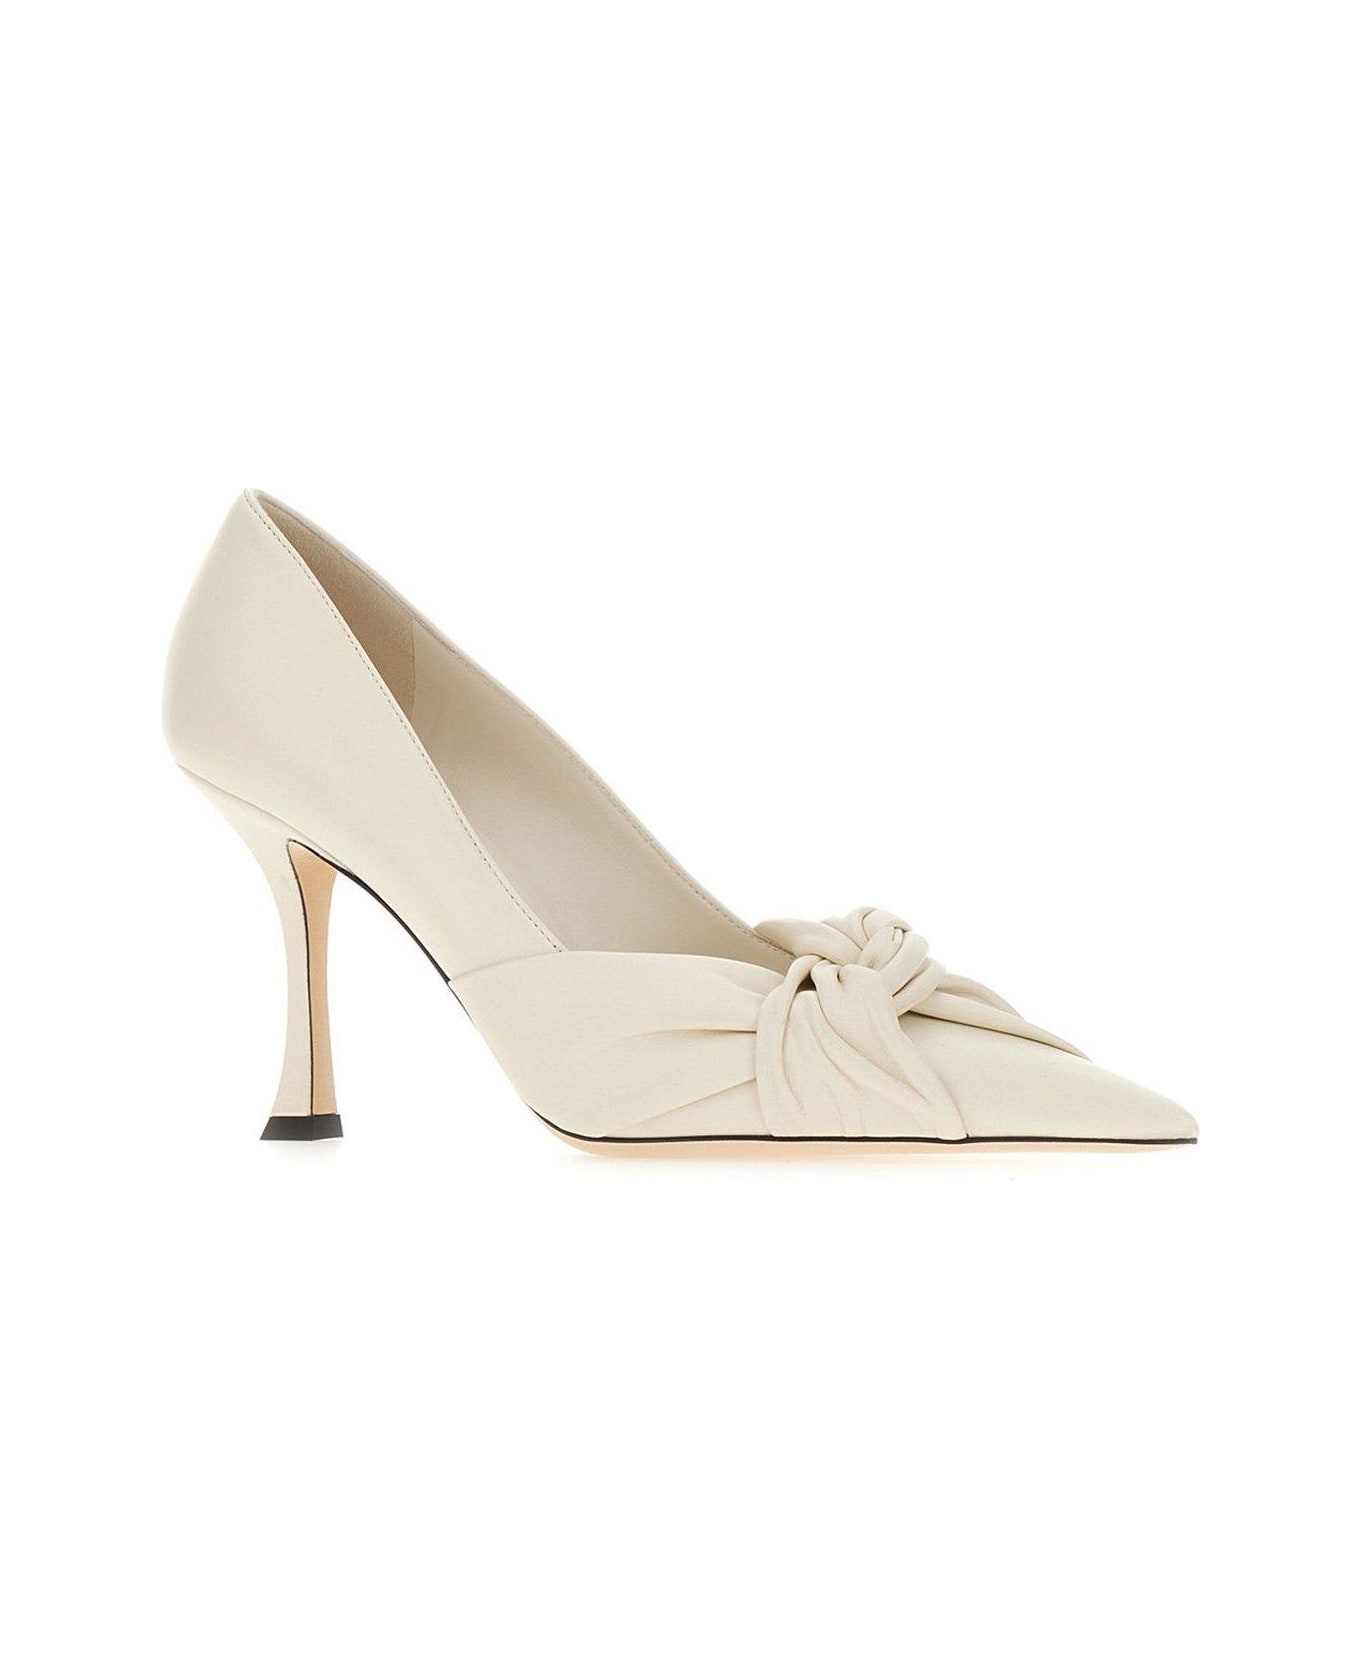 Jimmy Choo Hedera 90 Knot-detailed Pointed-toe Pumps - Milk ハイヒール